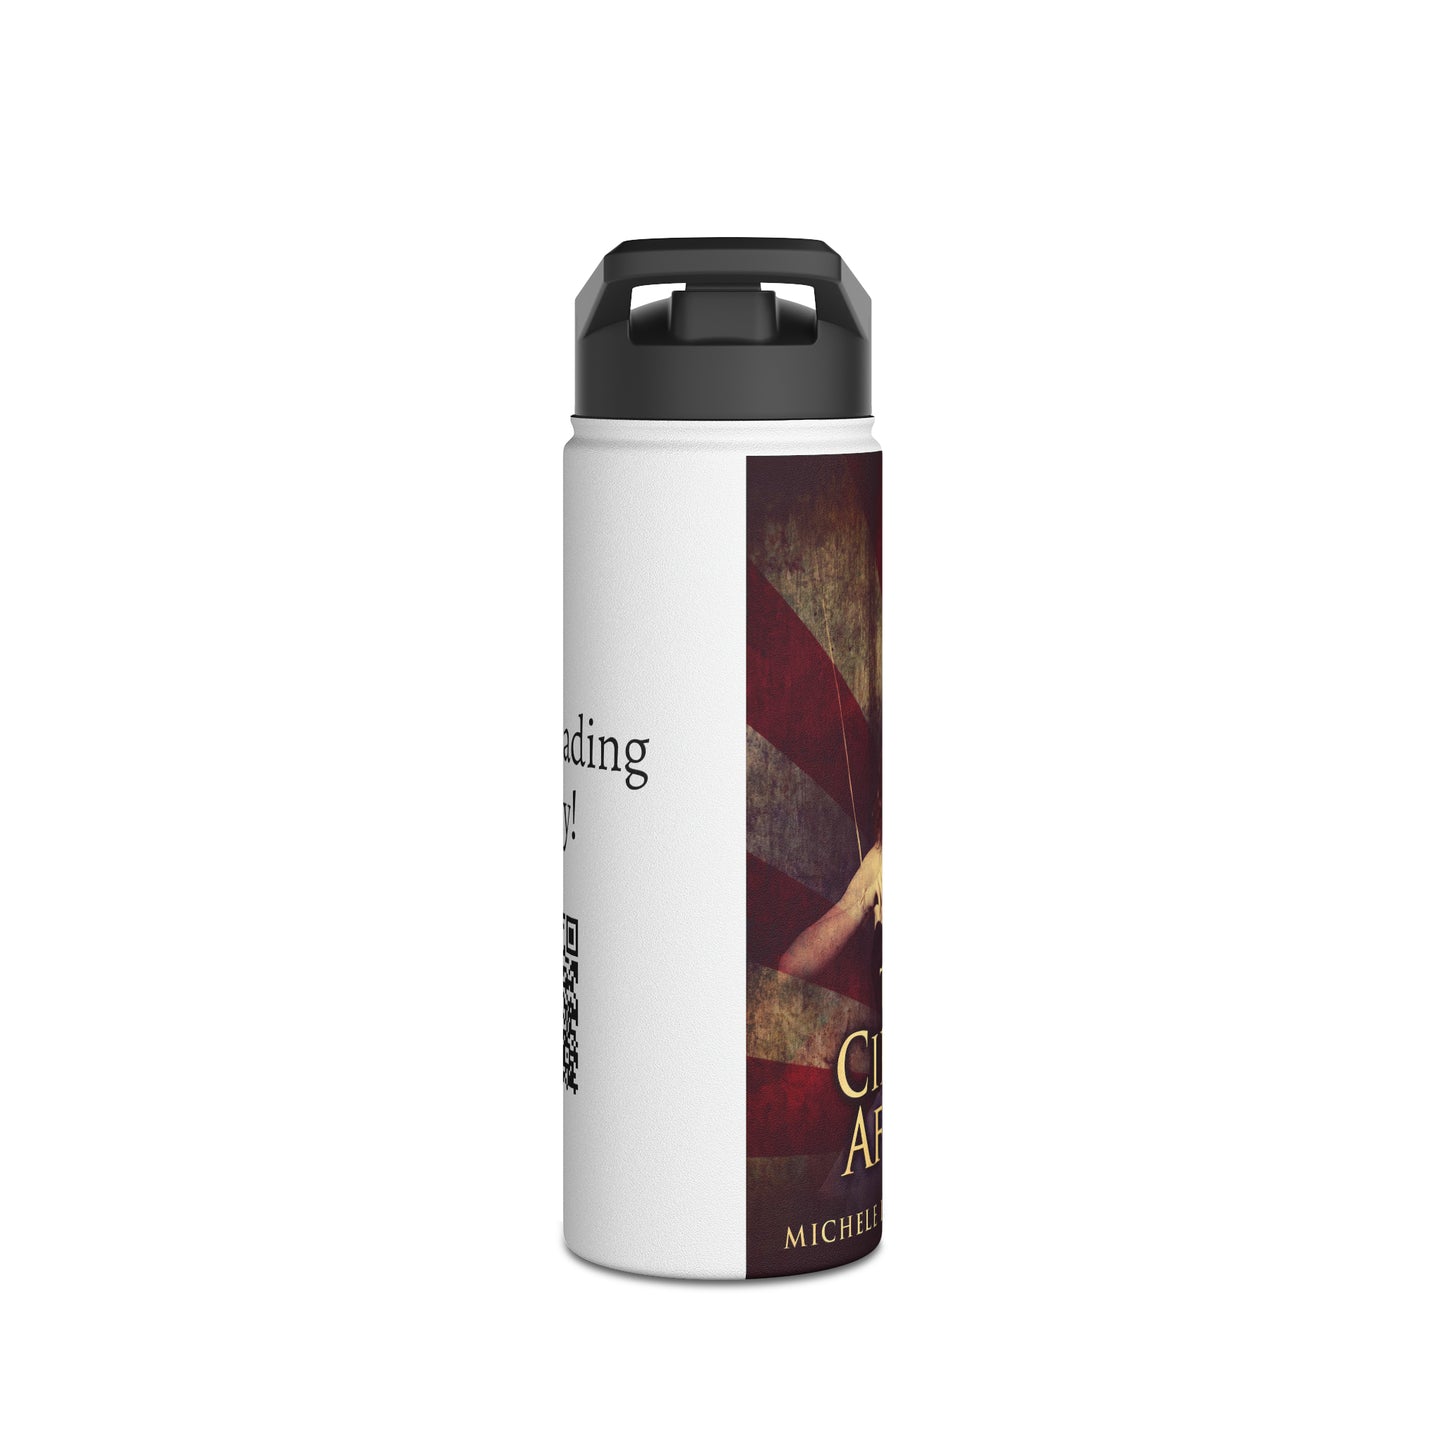 The Circus Affair - Stainless Steel Water Bottle